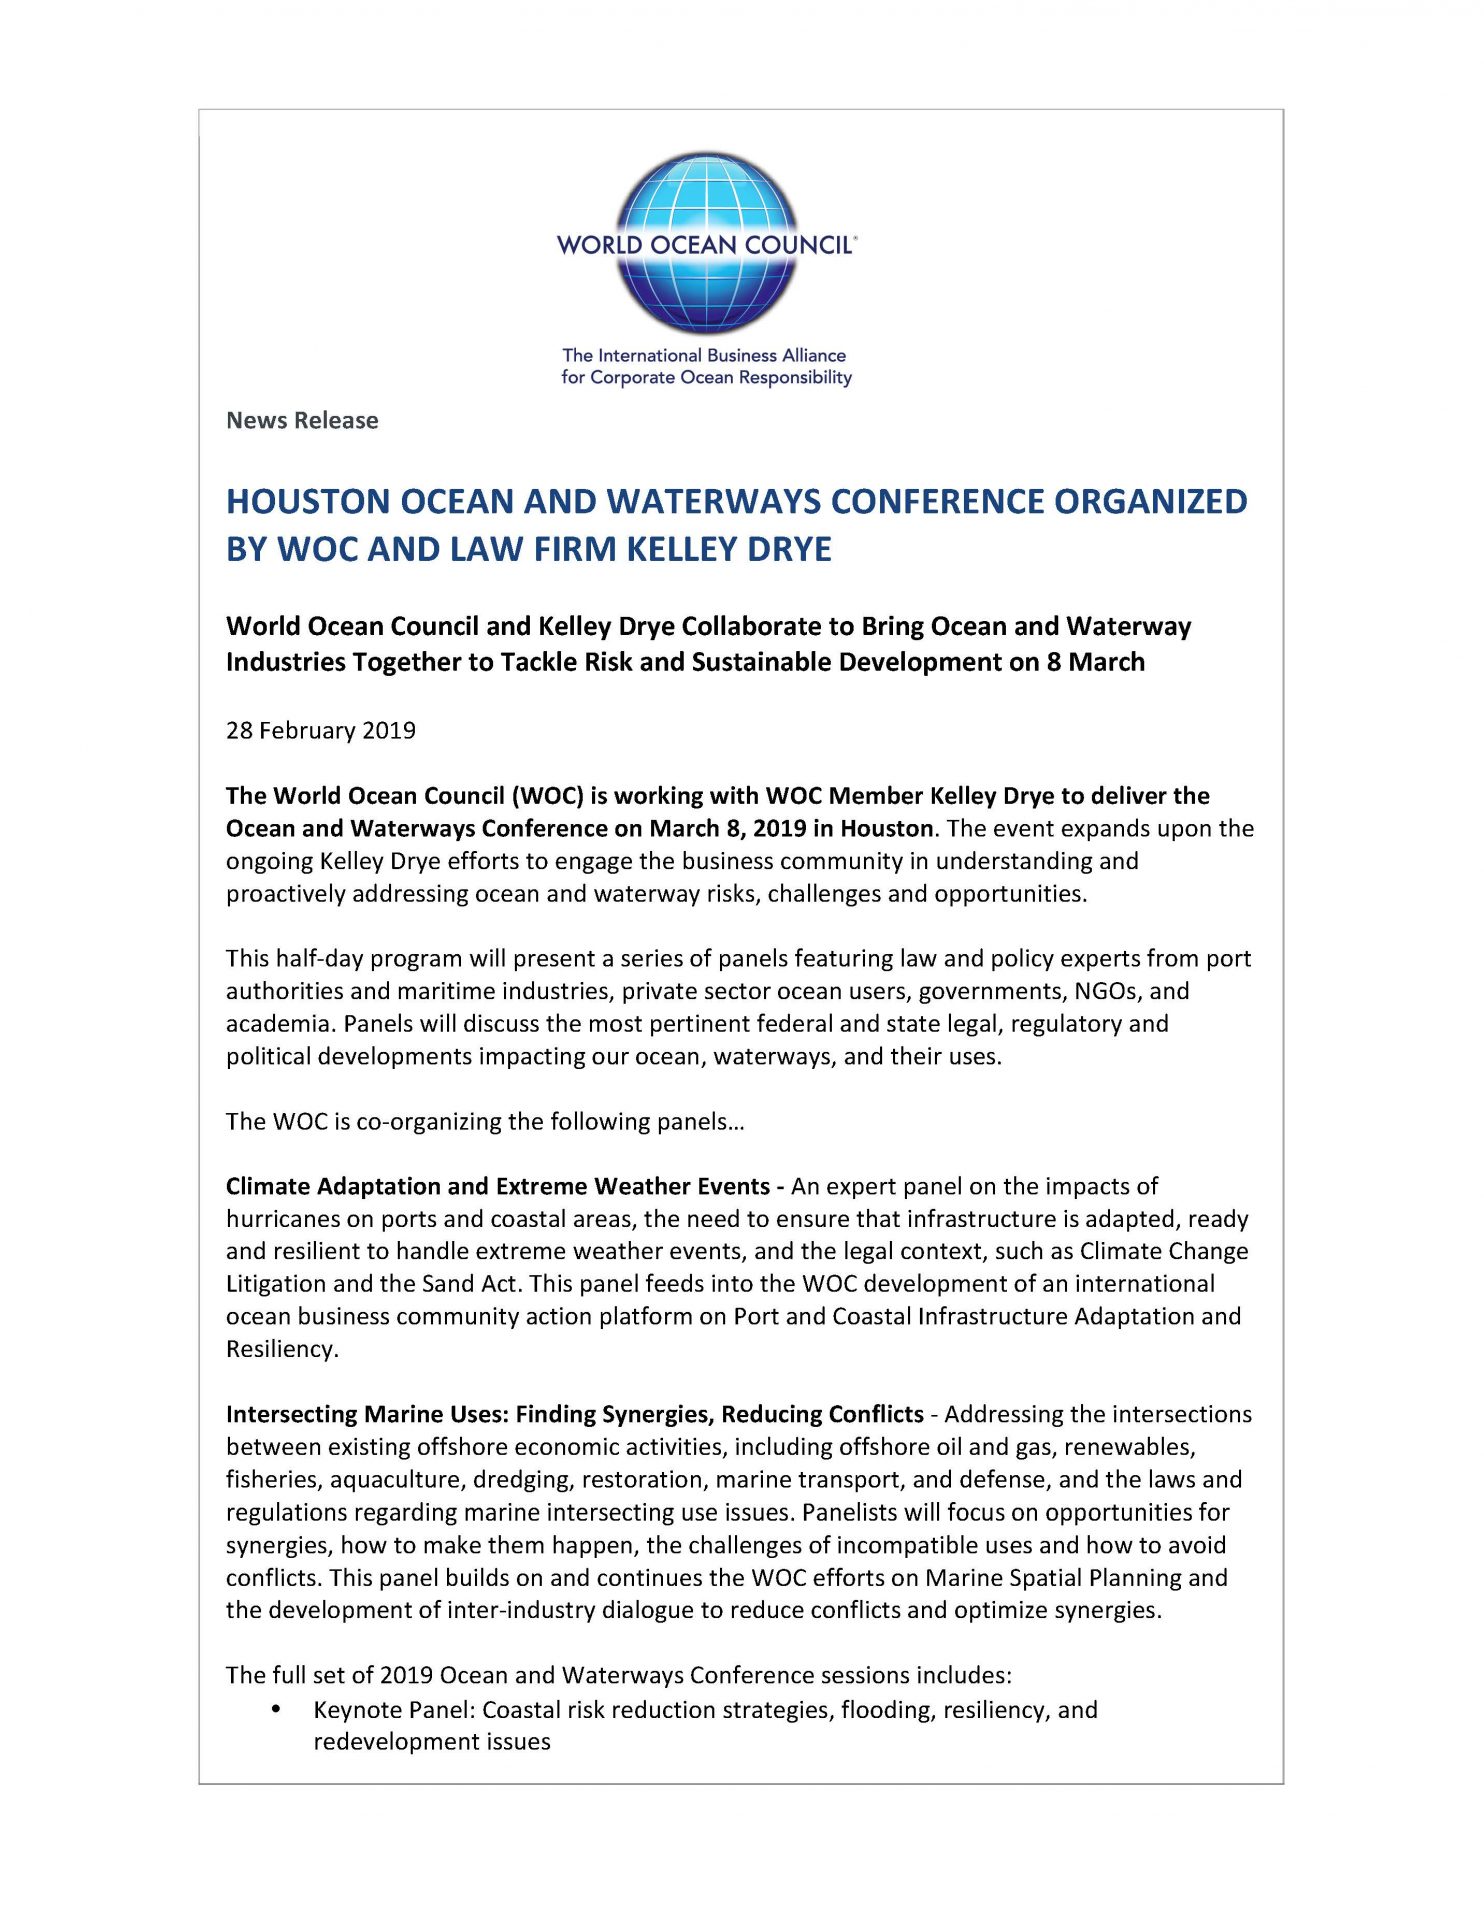 Houston Ocean and Waterways Conference Organized by WOC and Law Firm Kelley Drye - 28 February 2019